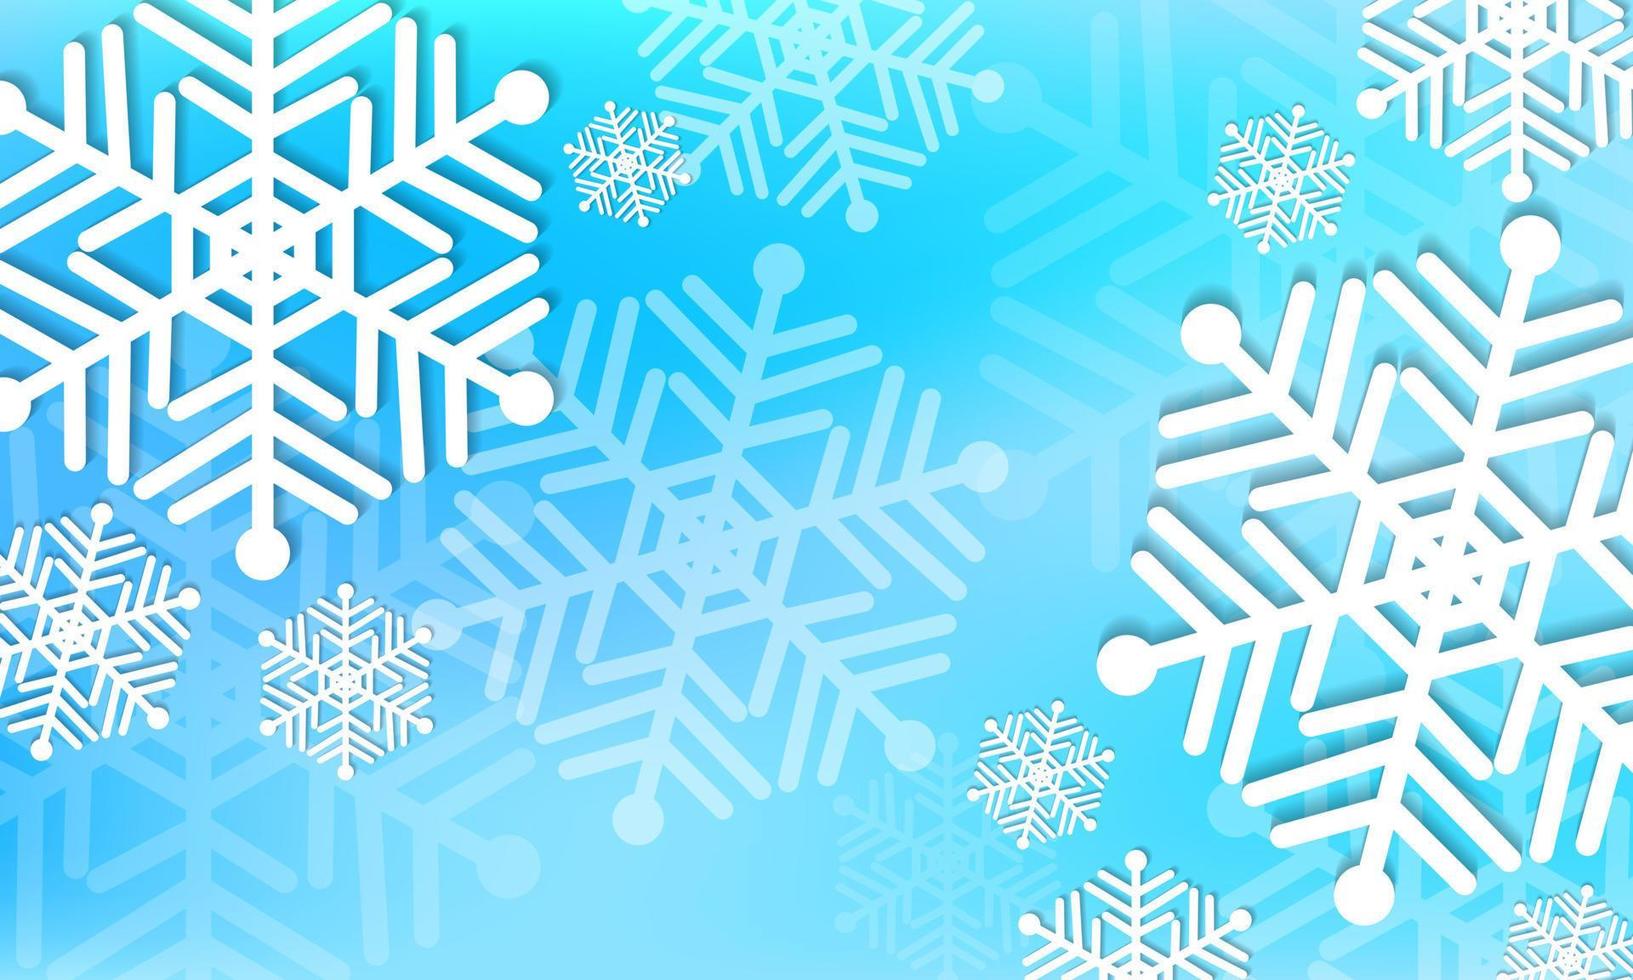 Falling snowflakes on blue background,snow night,Christmas background design. vector illustration.